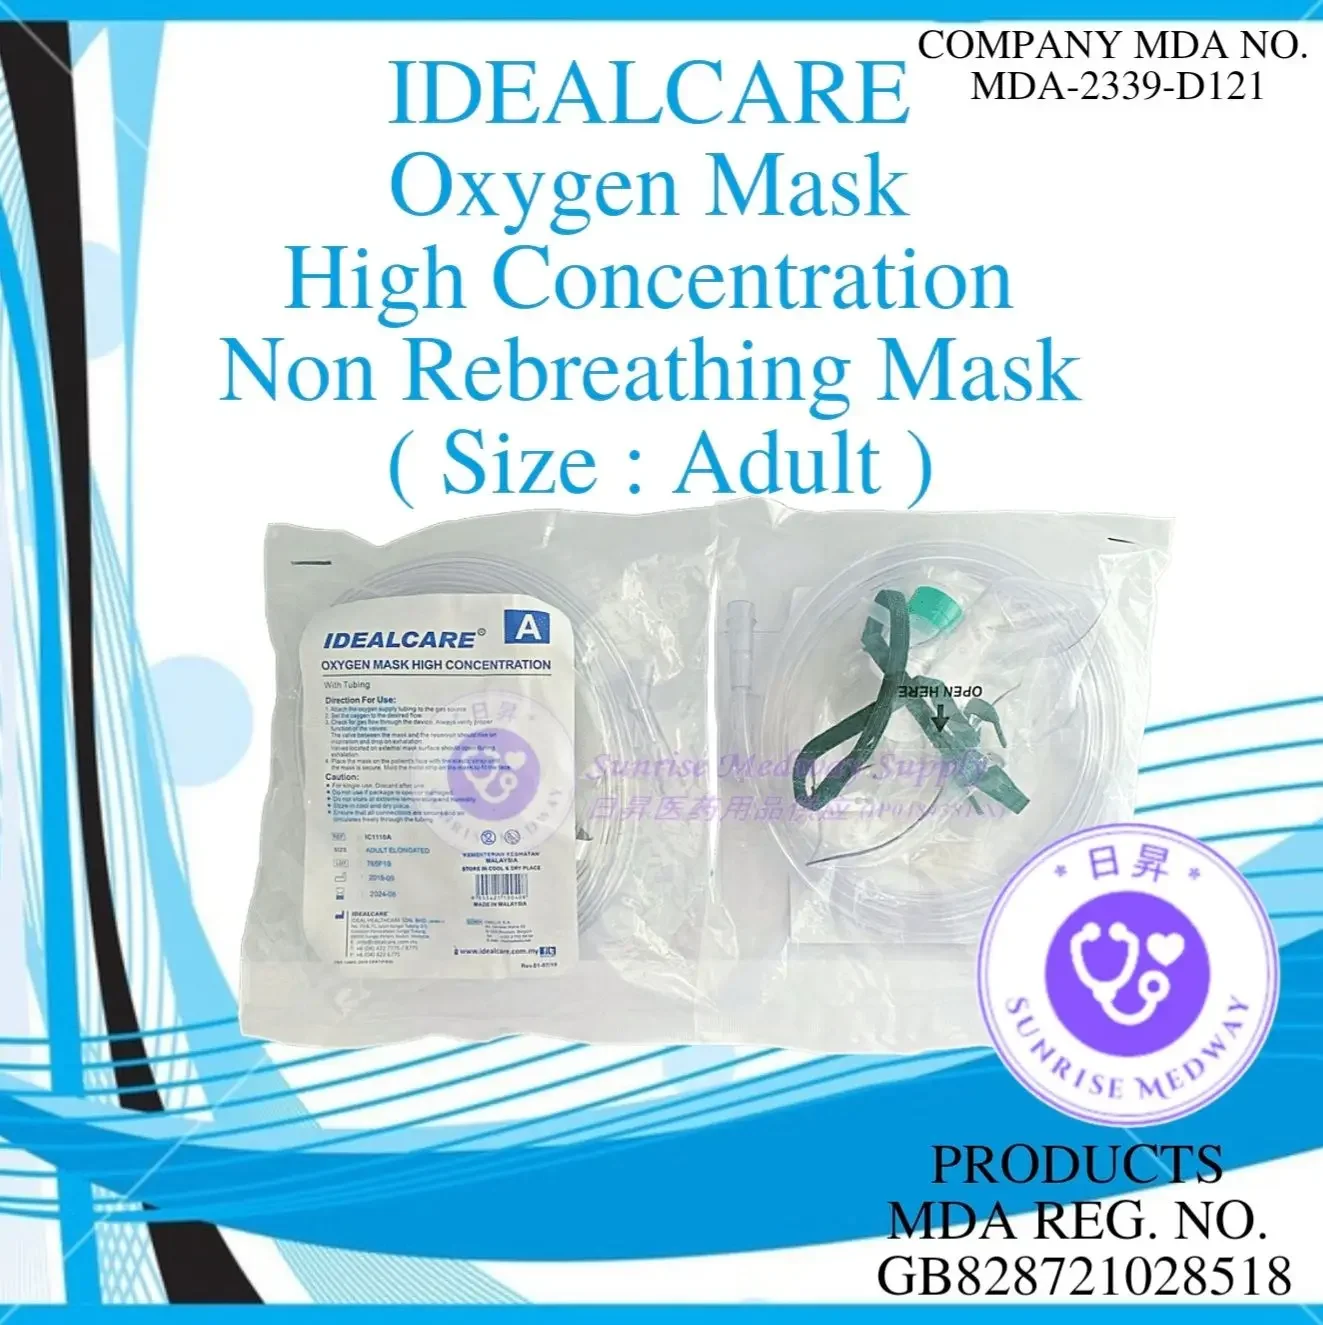 IDEALCARE Oxygen Mask High Concentration Non Rebreathing Mask, Adult, 1 pc/pkt